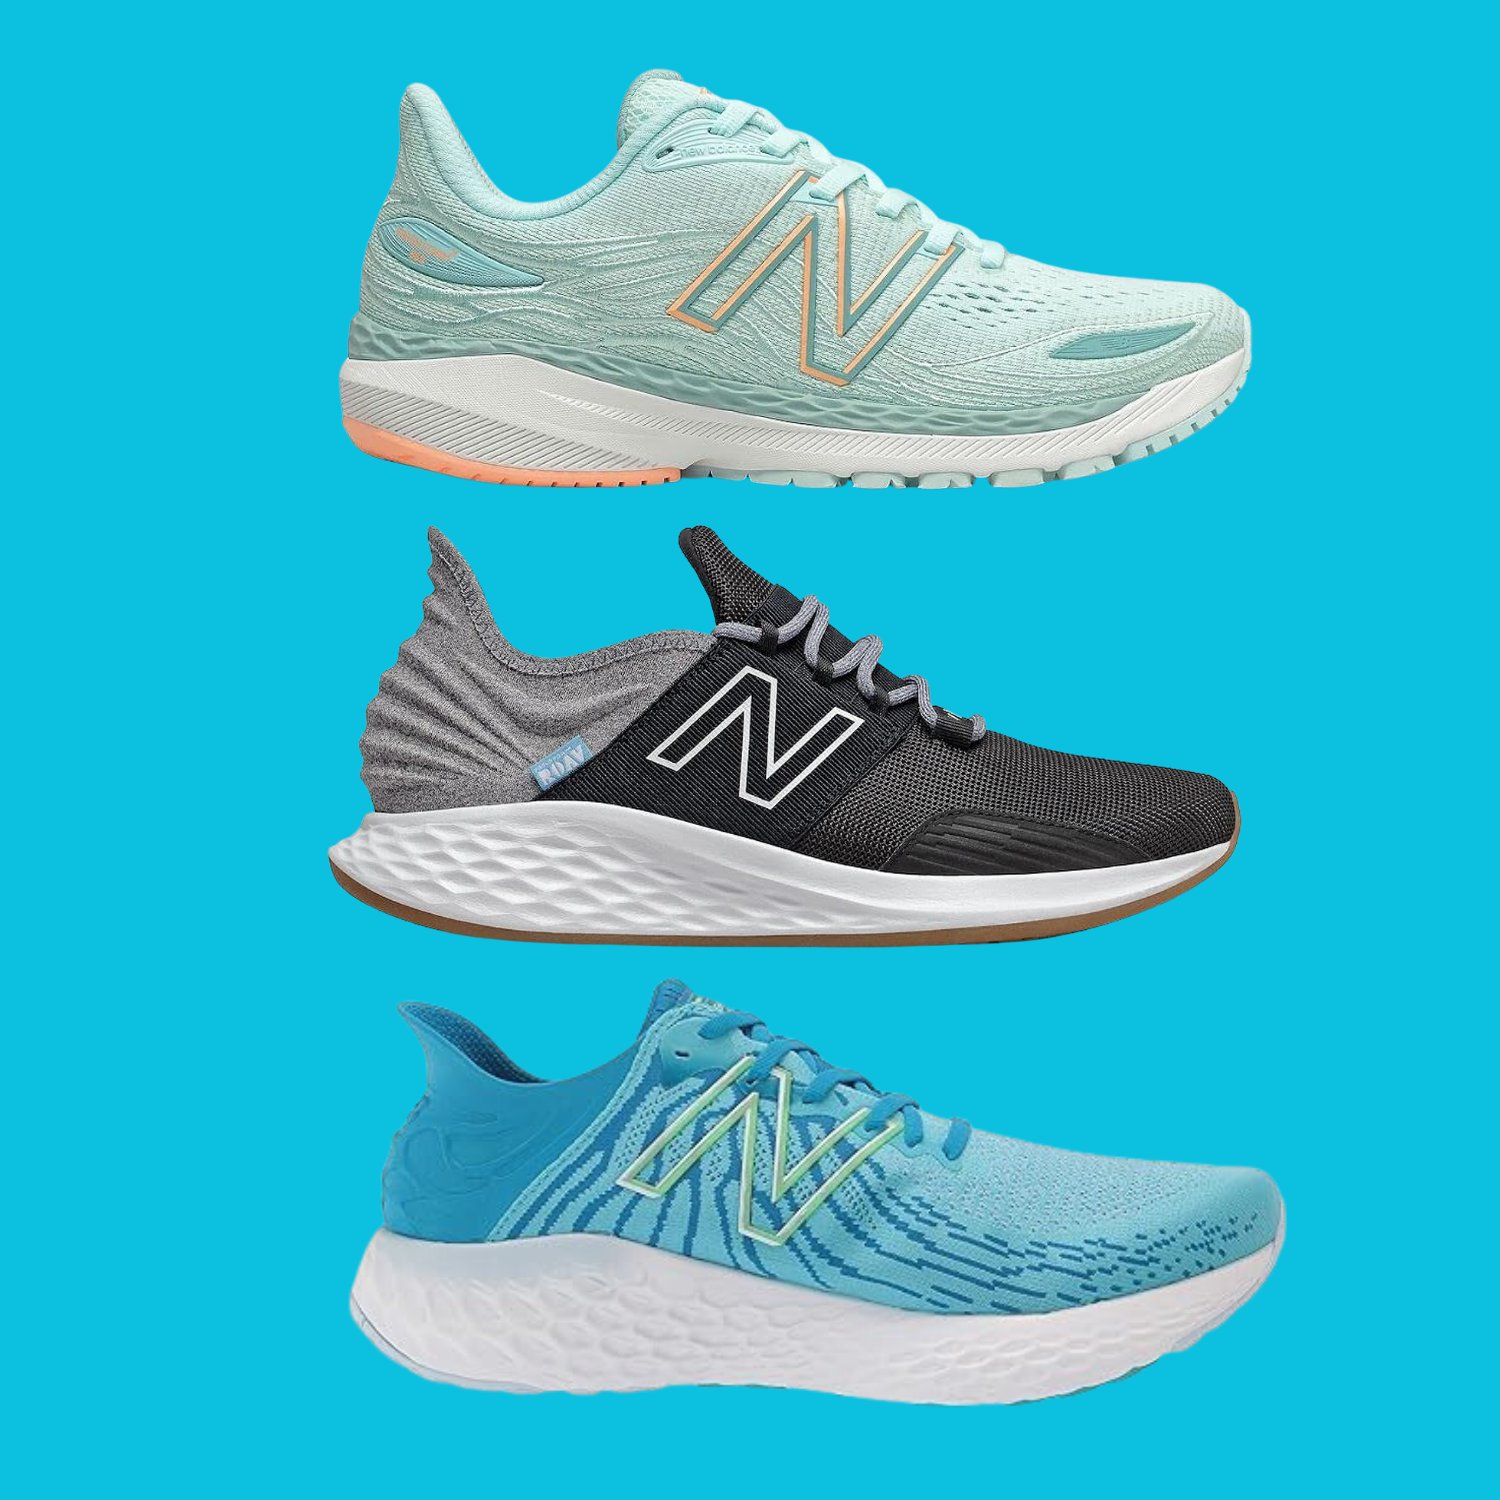 Best New Balance Shoes for Pronation